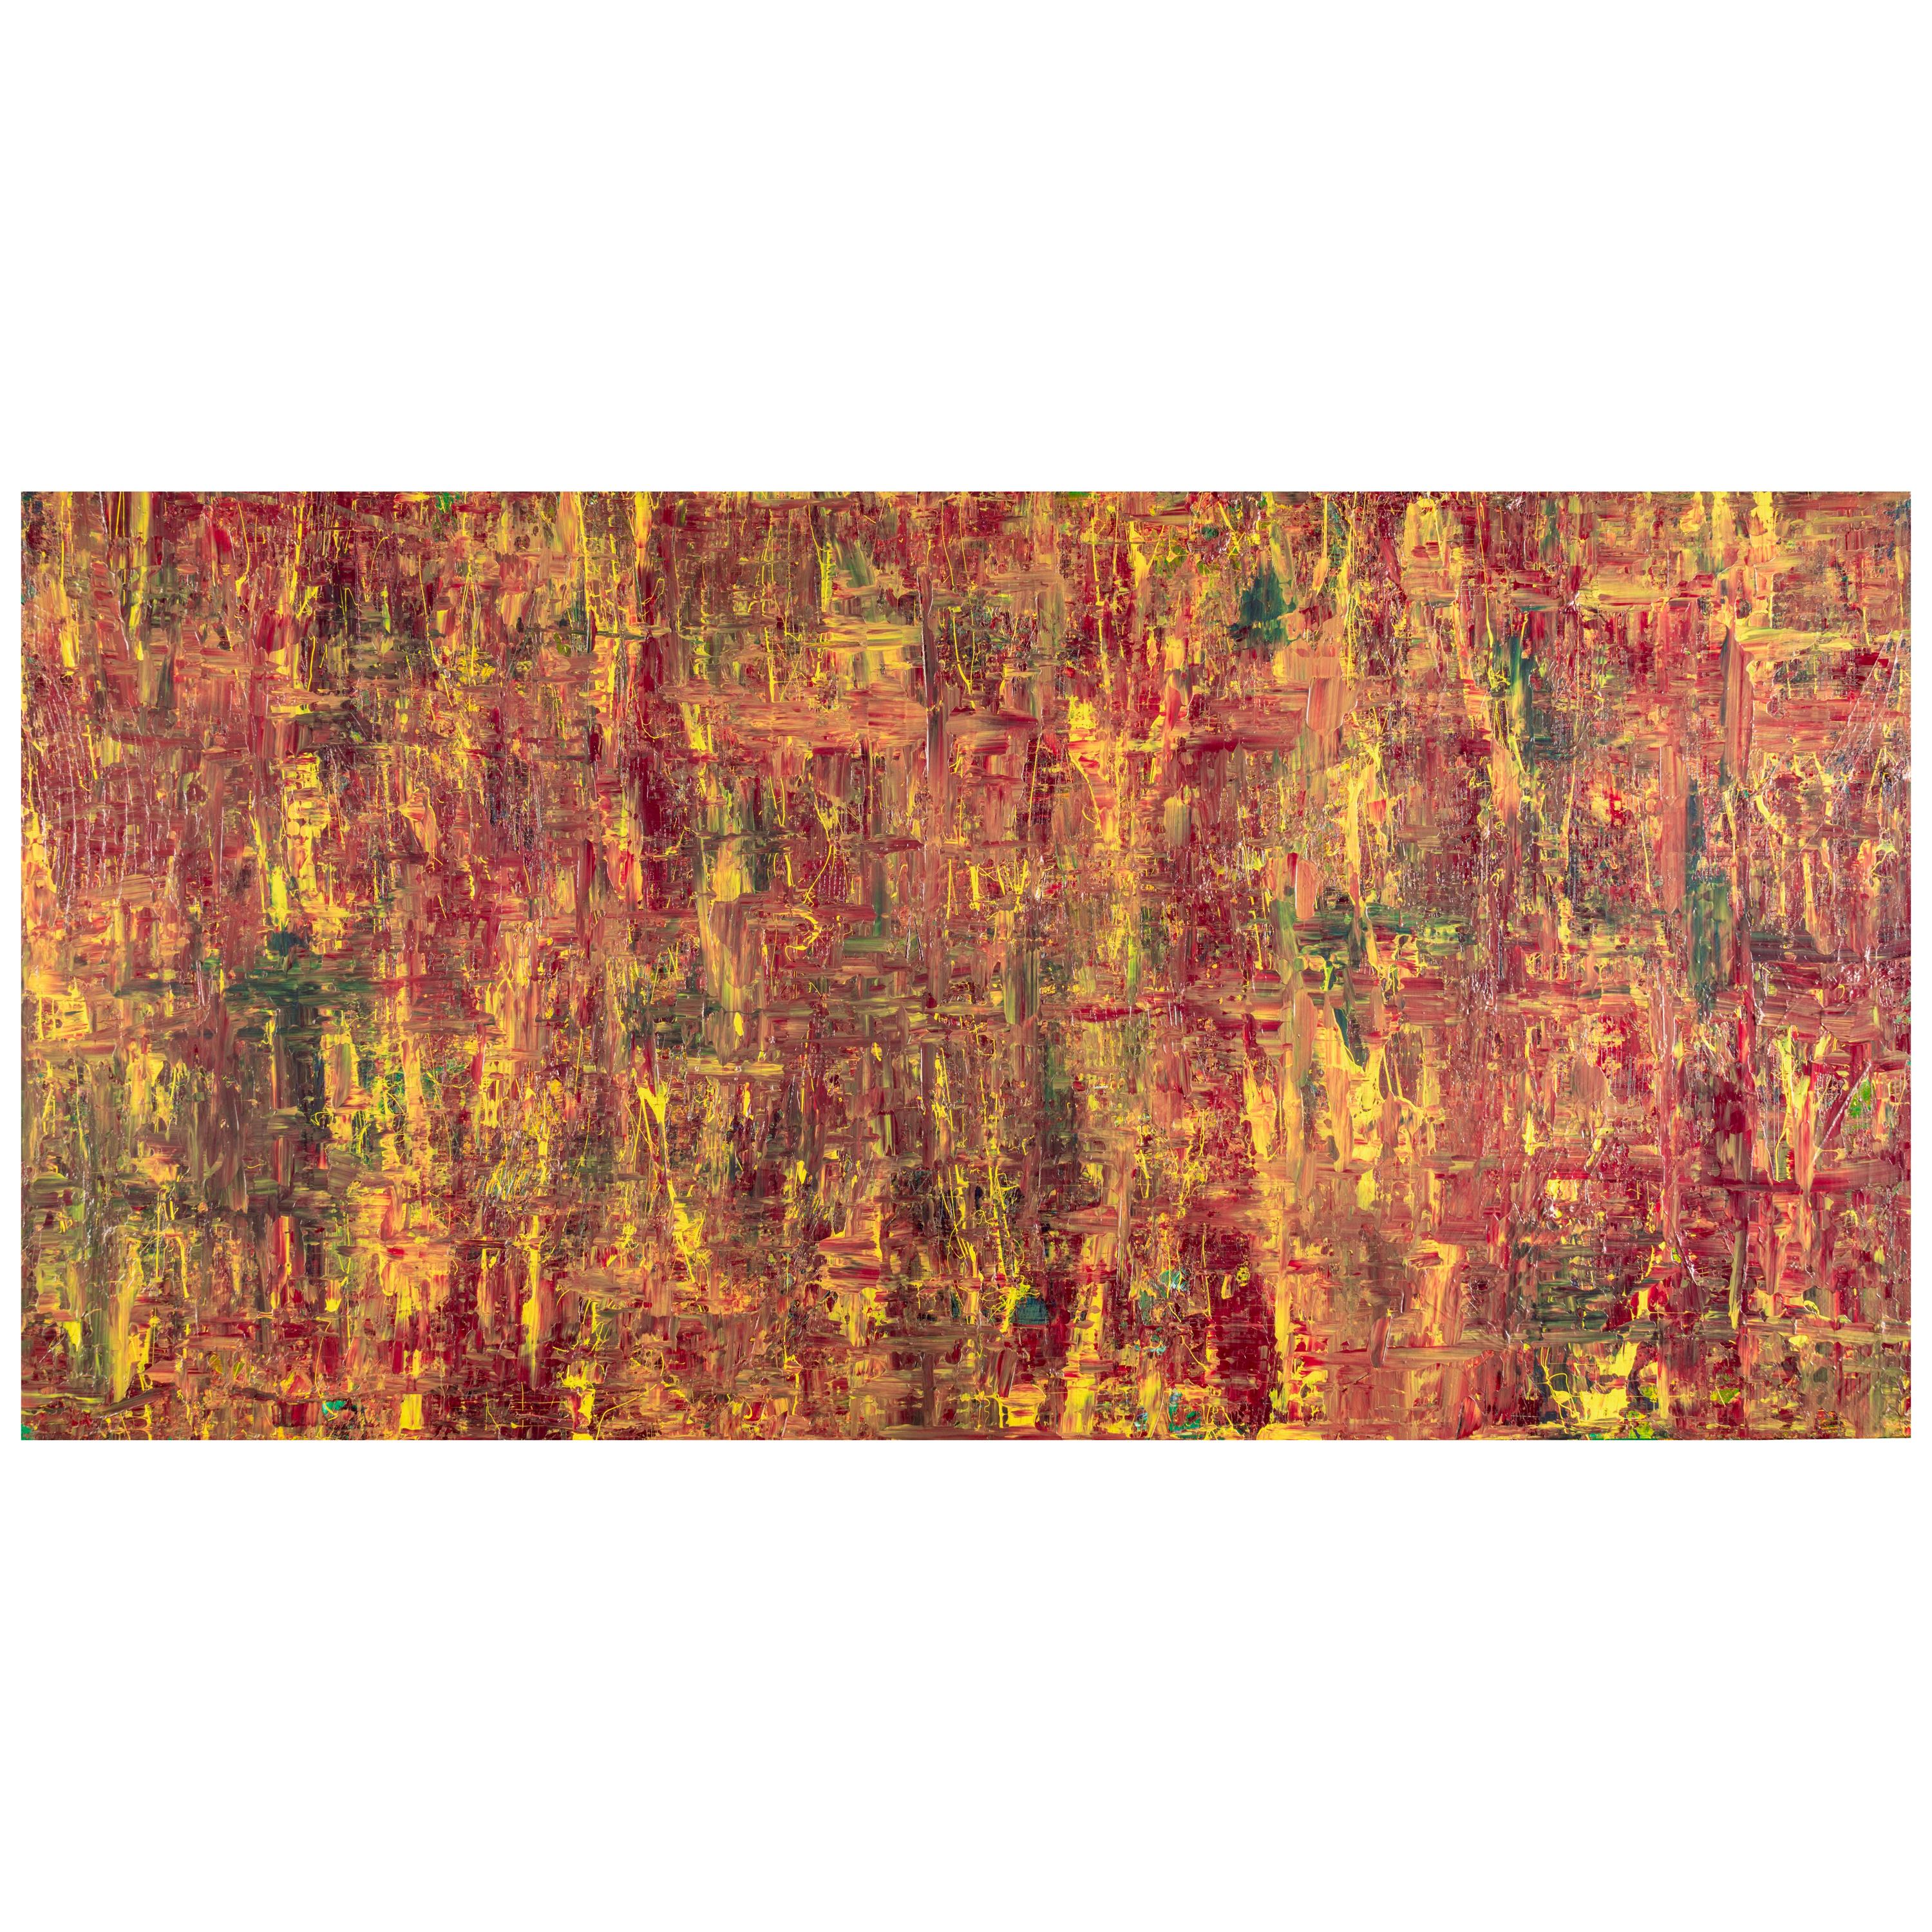 Abstract Expressionist Acrylic Painting On Canvas Gold Wood Frame Red Yellow